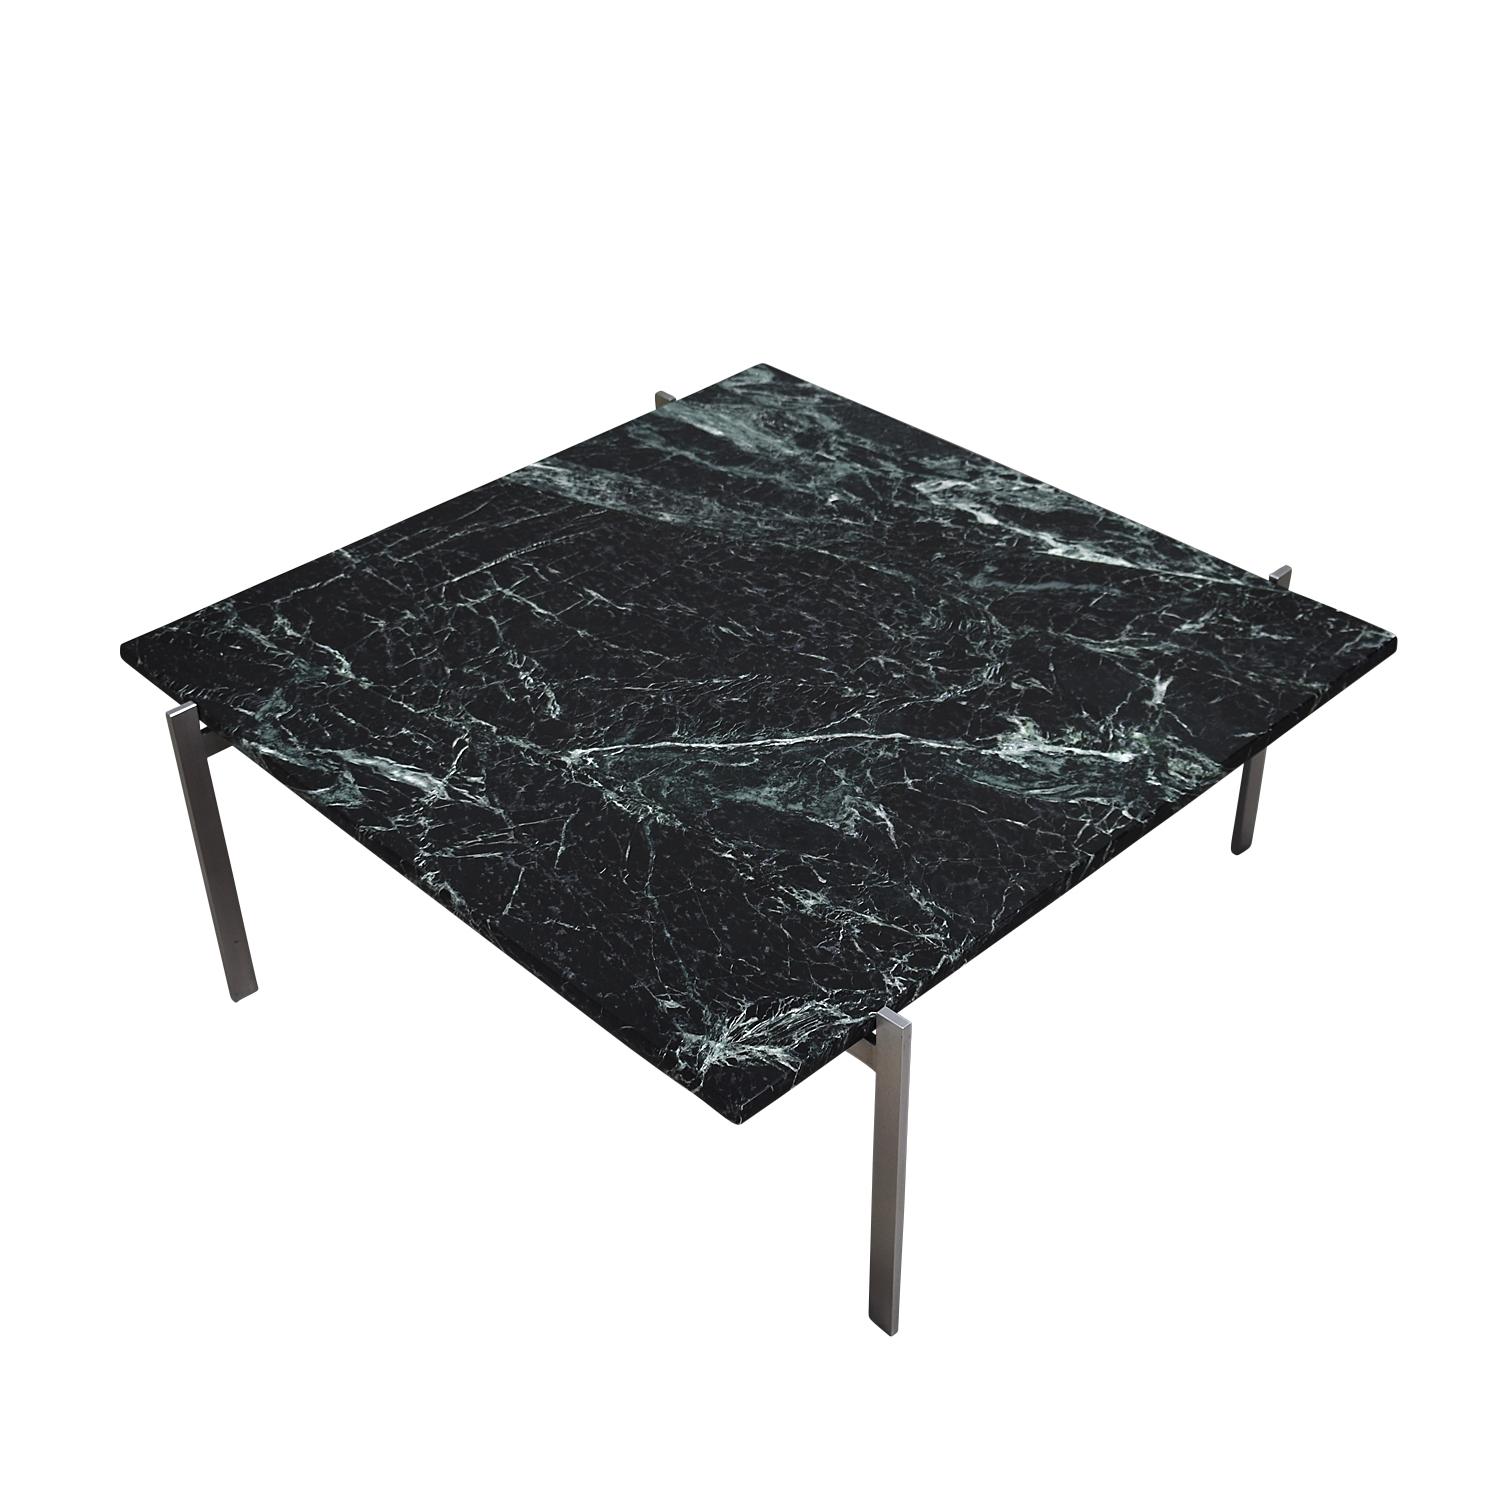 PK-61 coffee table by Poul Kjaerholm for Fritz Hansen, Denmark, 1956.

Gorgeous dark green marble top that has hints of black, white and lighter green in it.

The table is made of Italian spider green marble and stainless steel. The base is